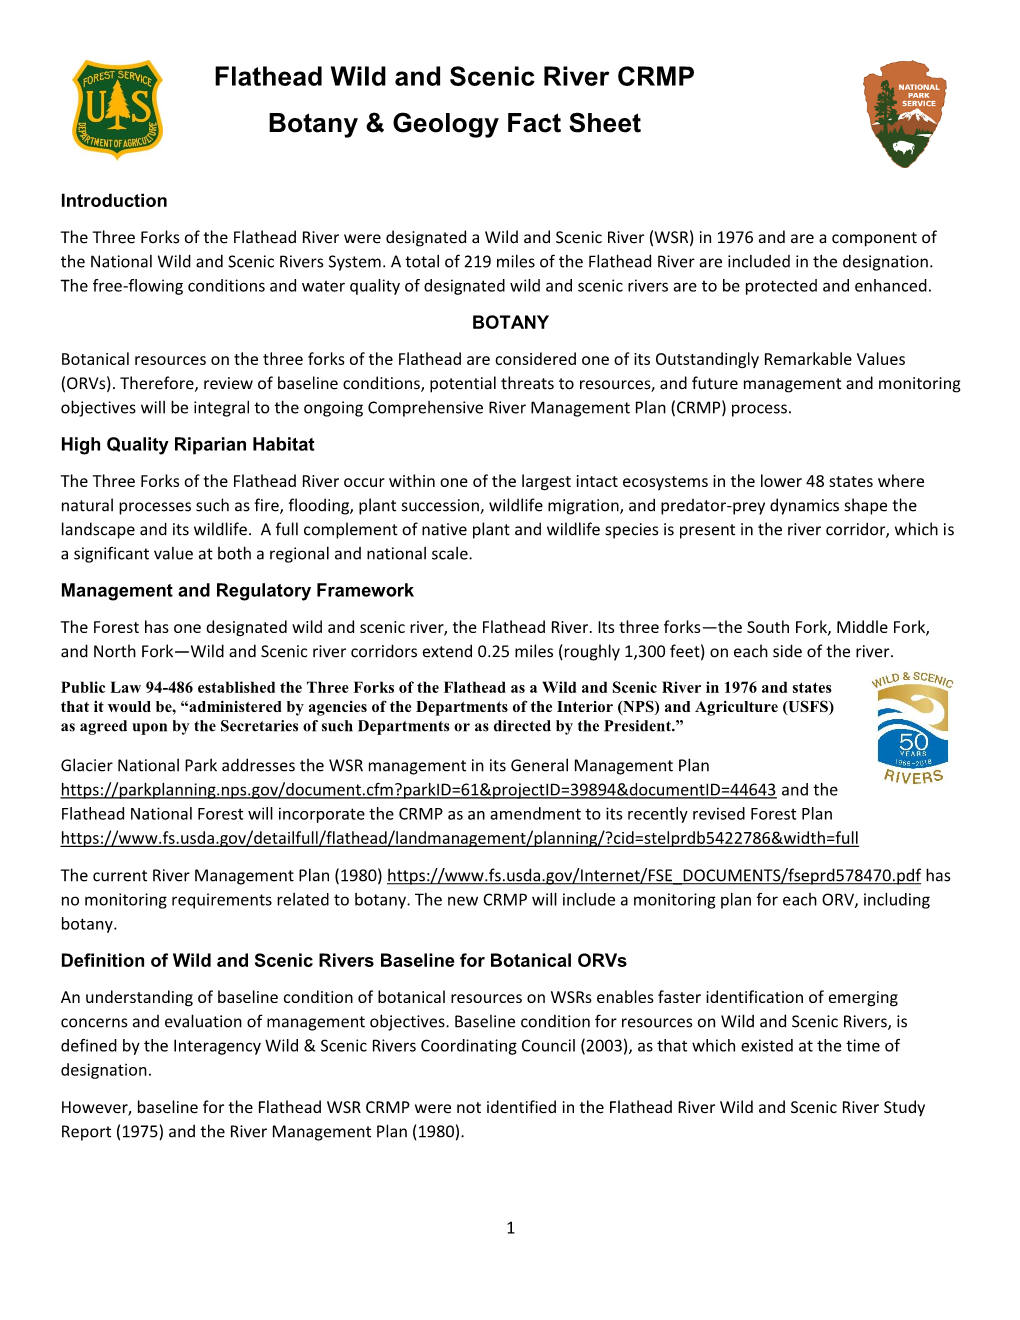 Flathead Wild and Scenic River CRMP Botany & Geology Fact Sheet